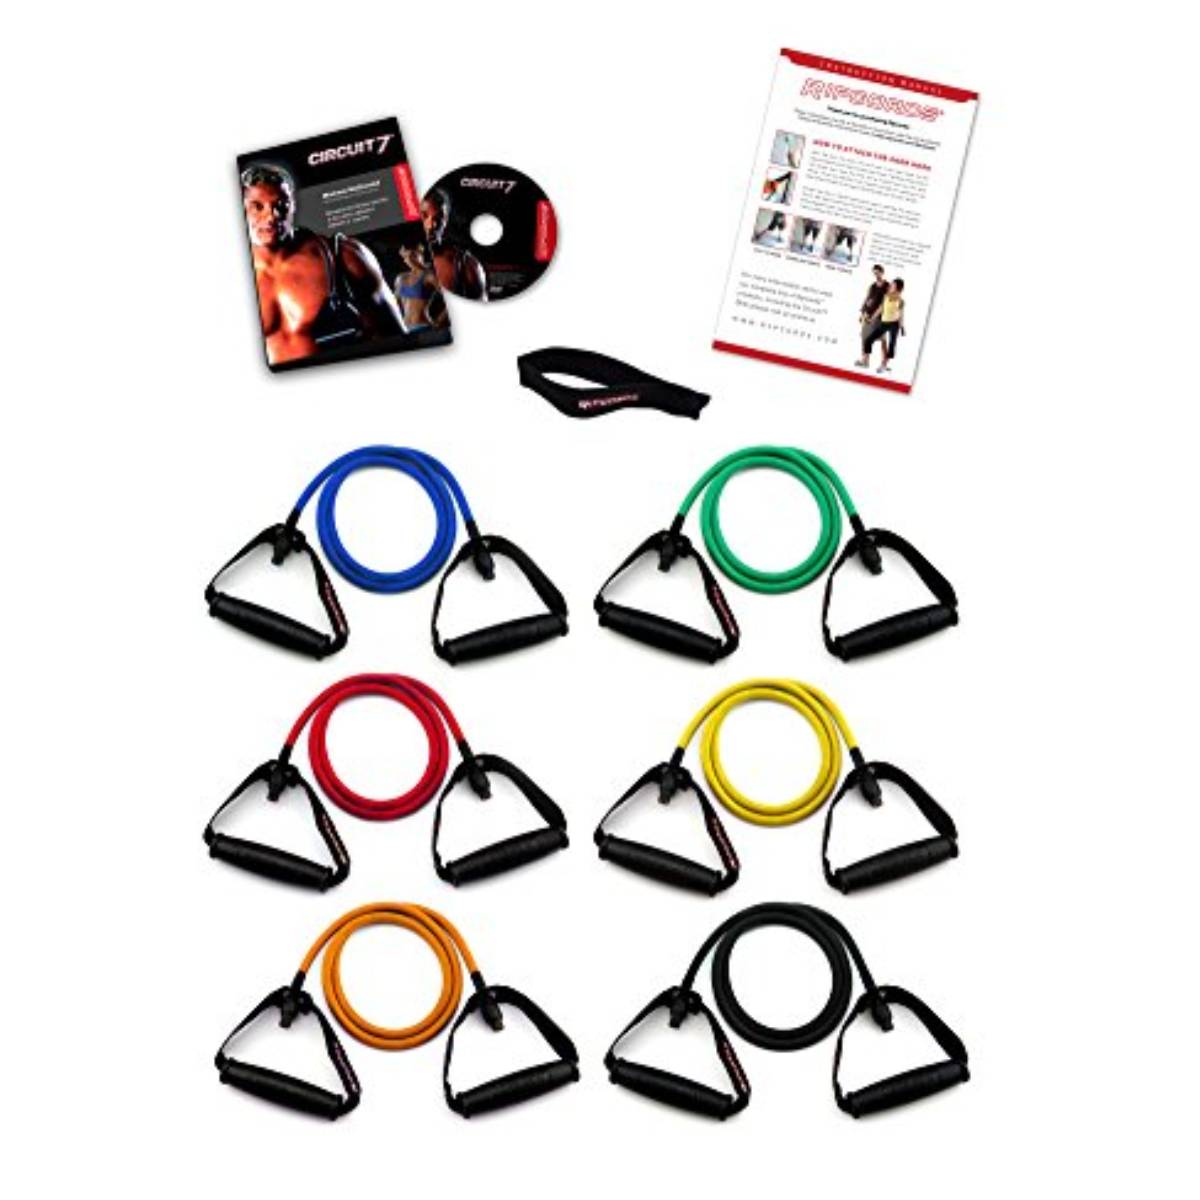 Ripcords Resistance Exercise Bands package set